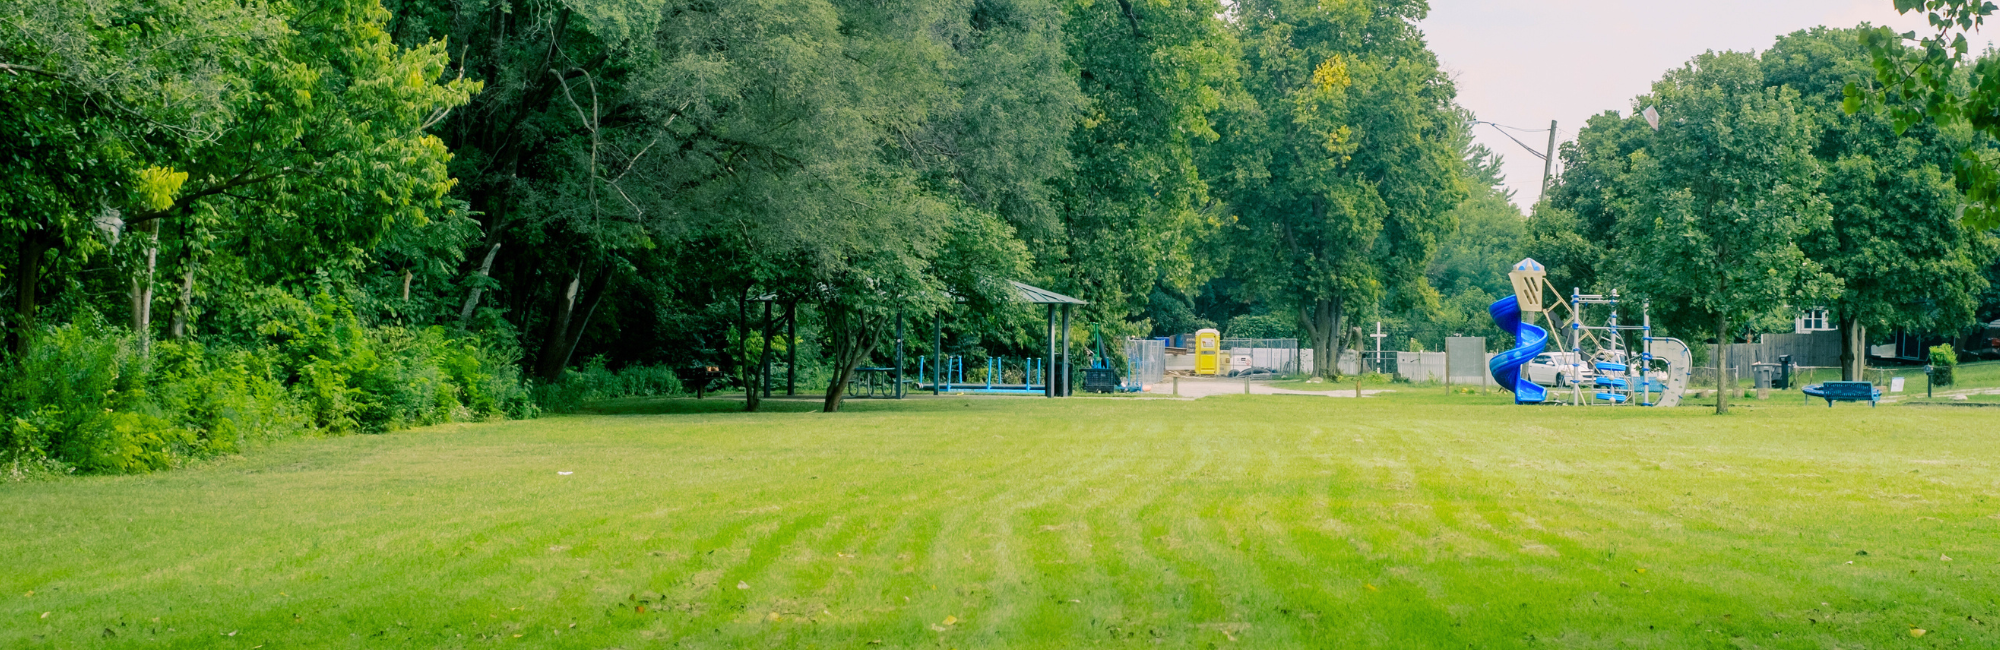 Large open green area in park with playground in the distance